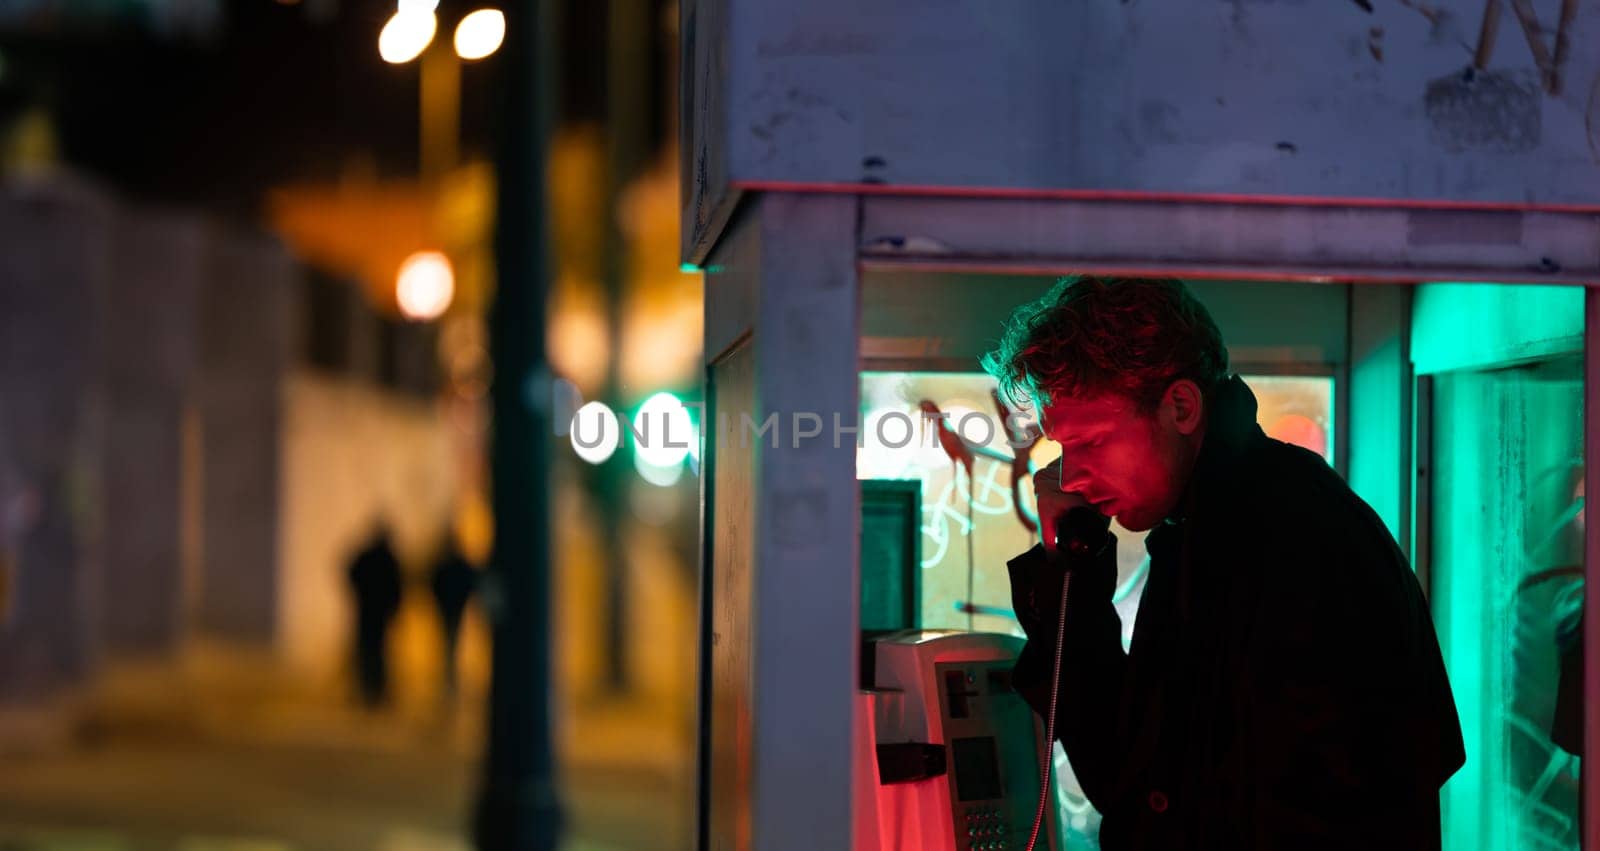 A man is talking on a phone at noir style in booth The image has a dark and moody atmosphere, with the man's face illuminated by the phone's light